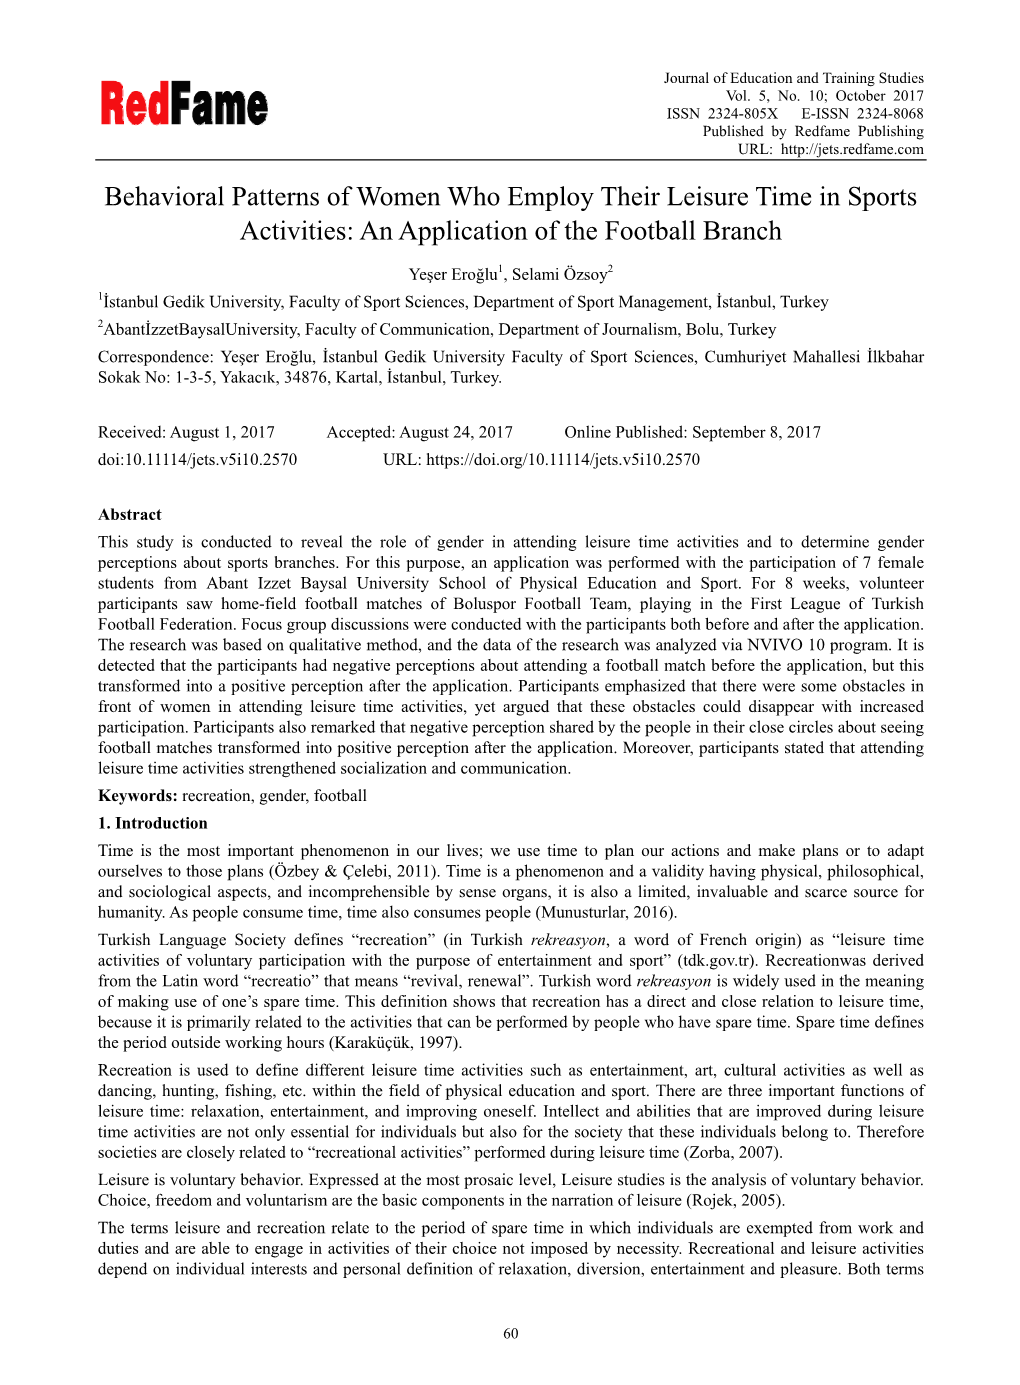 Behavioral Patterns of Women Who Employ Their Leisure Time in Sports Activities: an Application of the Football Branch